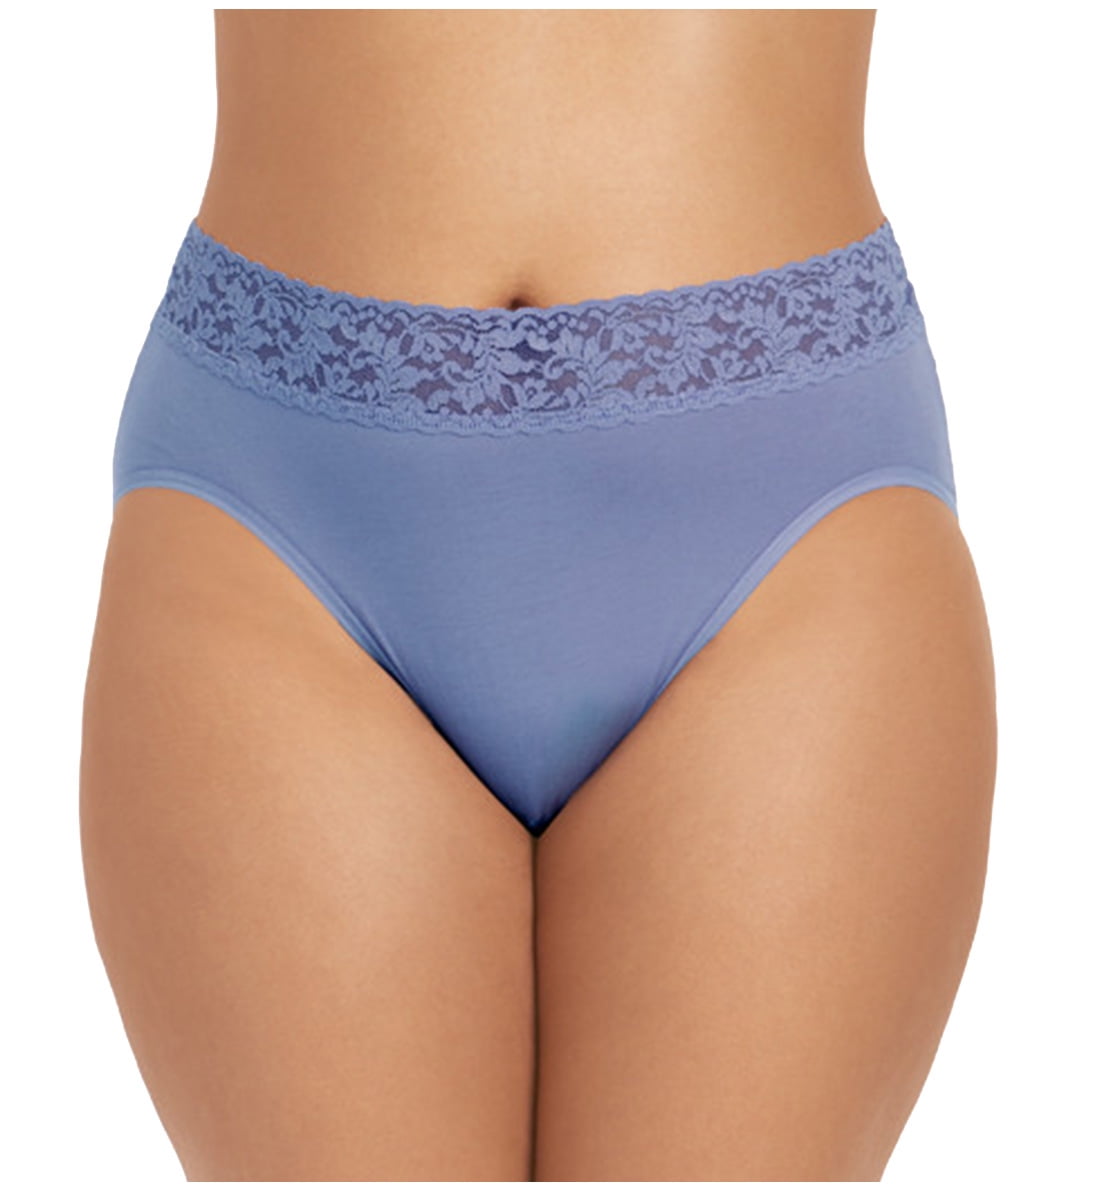 Glamour Boutique's Gaff Thong Underwear Male-to-Female Tucking